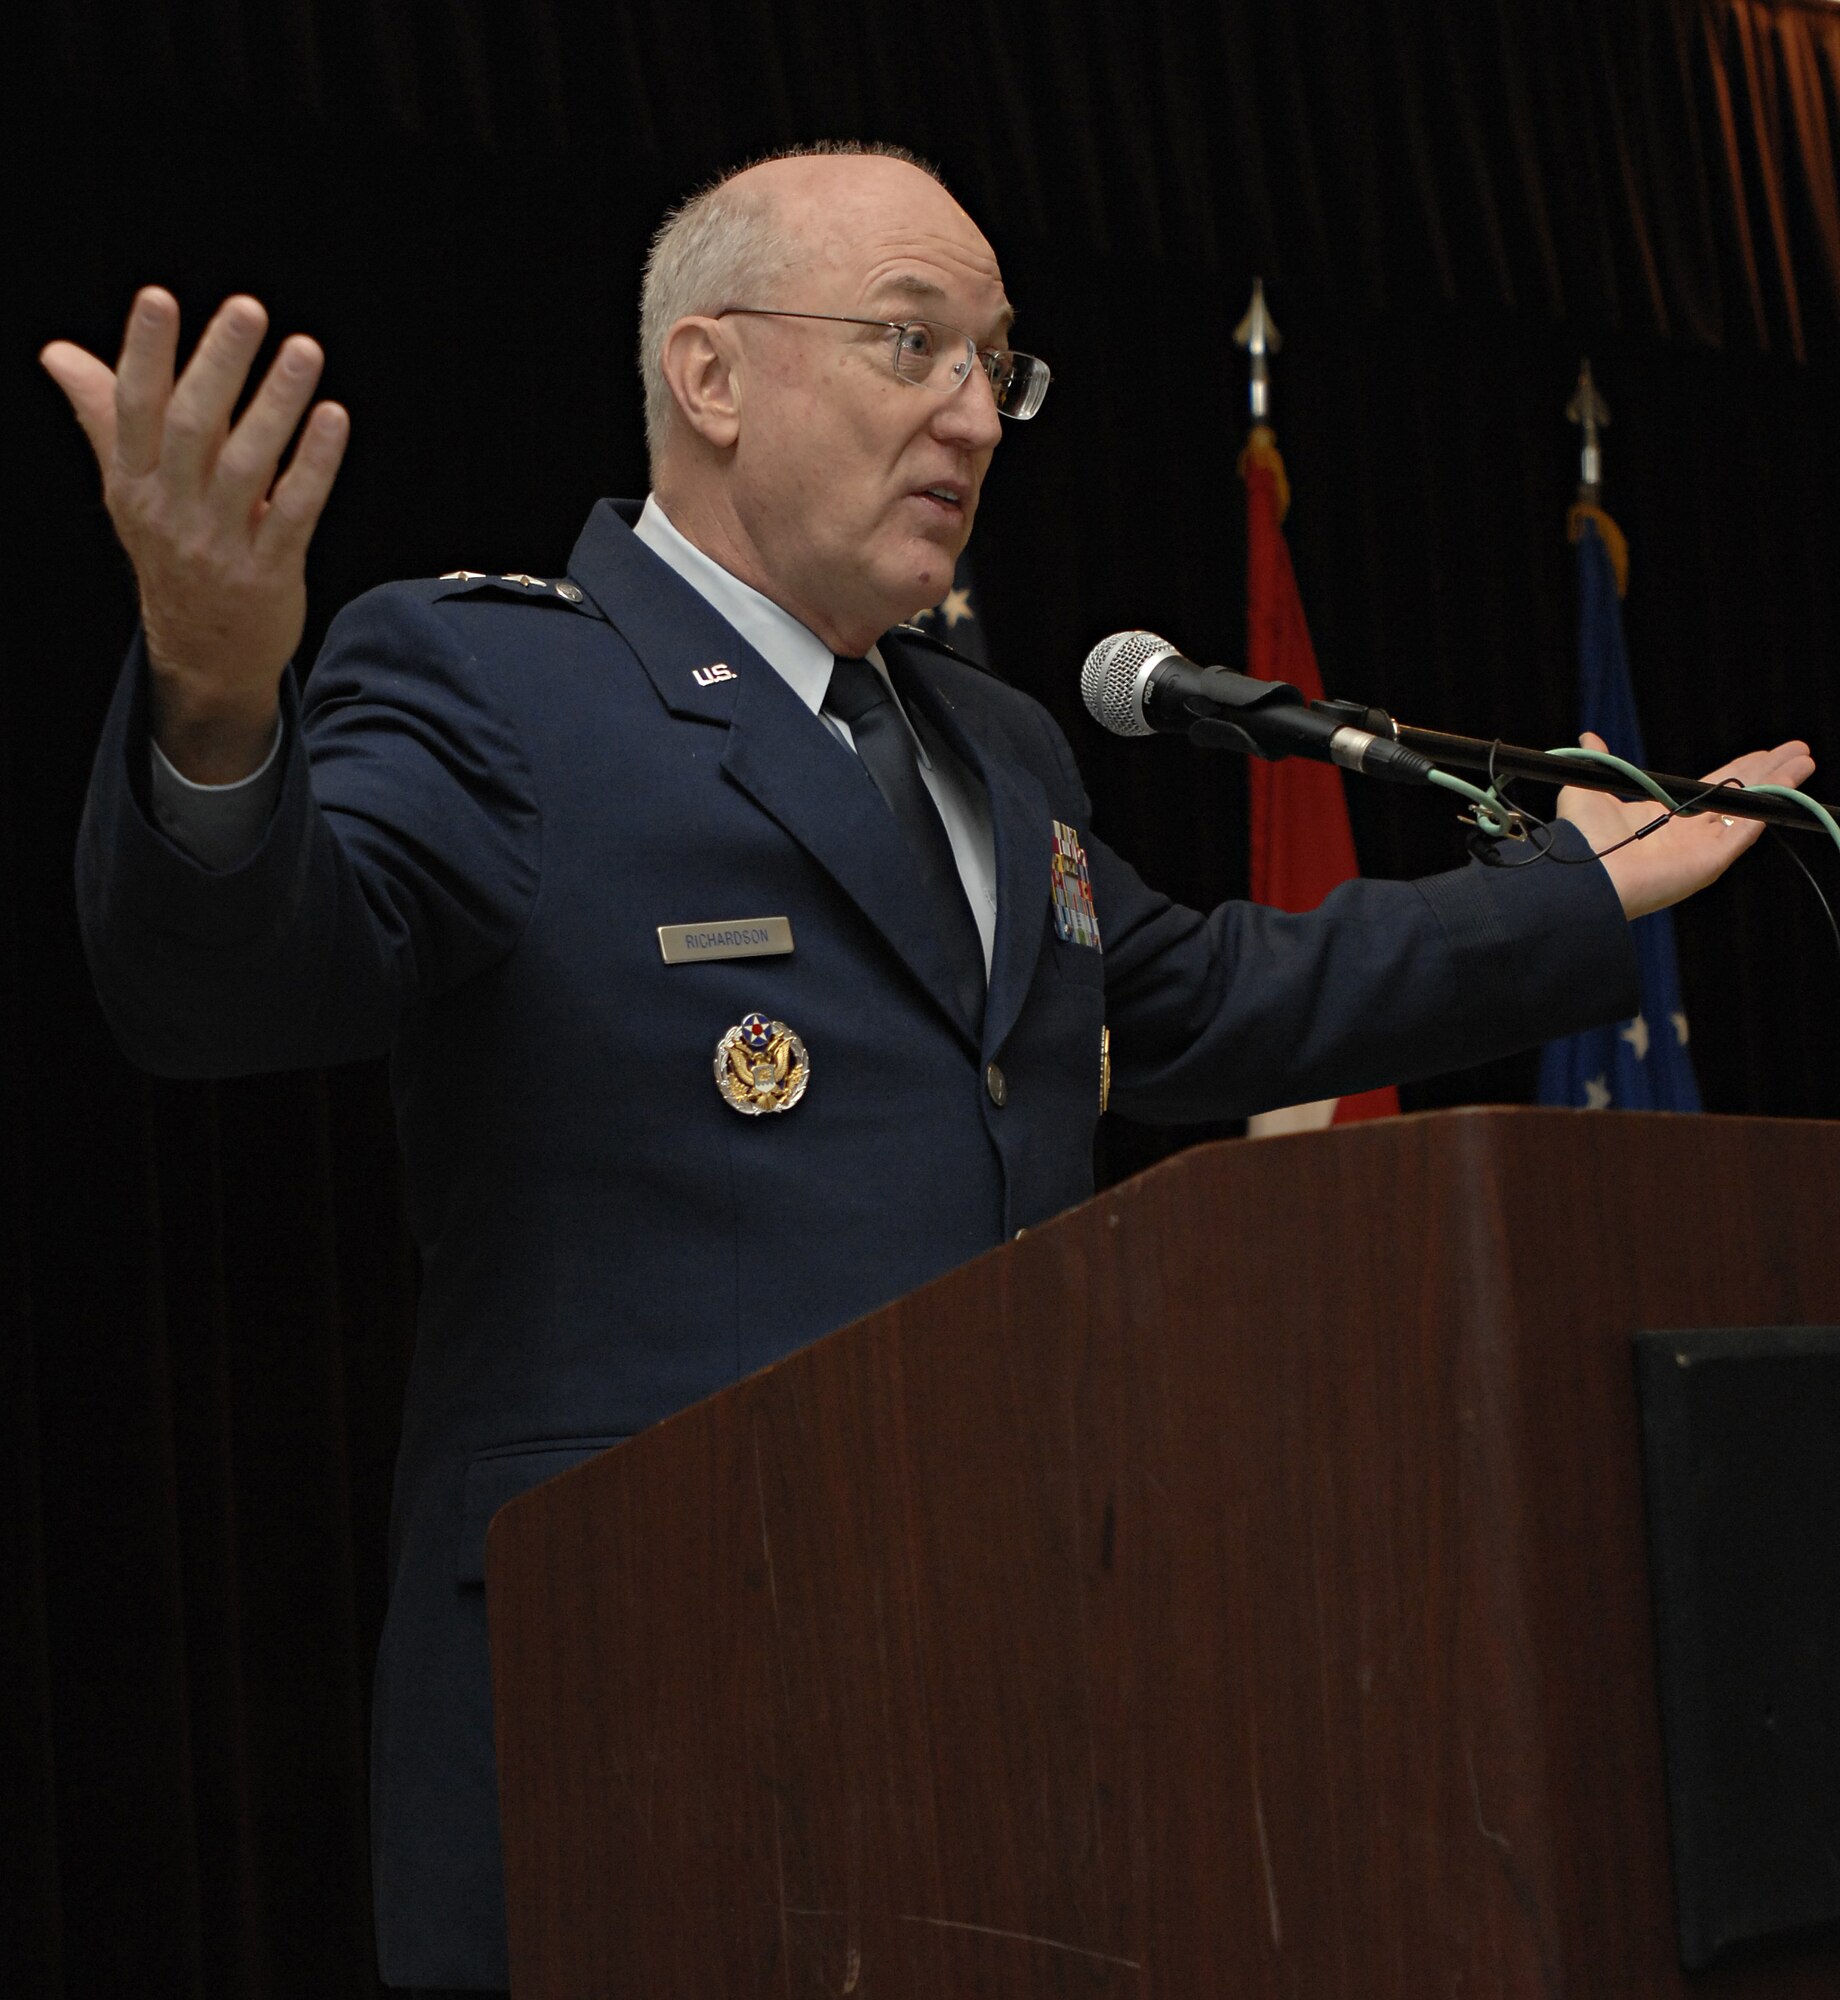 Chap. (Maj. Gen.) Cecil Richardson, Chief of Air Force Chaplains, tells the tale of David and Goliath during the annual National Prayer Observance breakfast held at the Incirlik Combined Club, Jan. 26. The annual National Prayer Observance is a traditional event where the president, members of congress and other government leaders gather to reaffirm our nation’s spiritual heritage and to seek divine guidance. (U.S. Air Force photo/Senior Airman Benjamin Wilson)